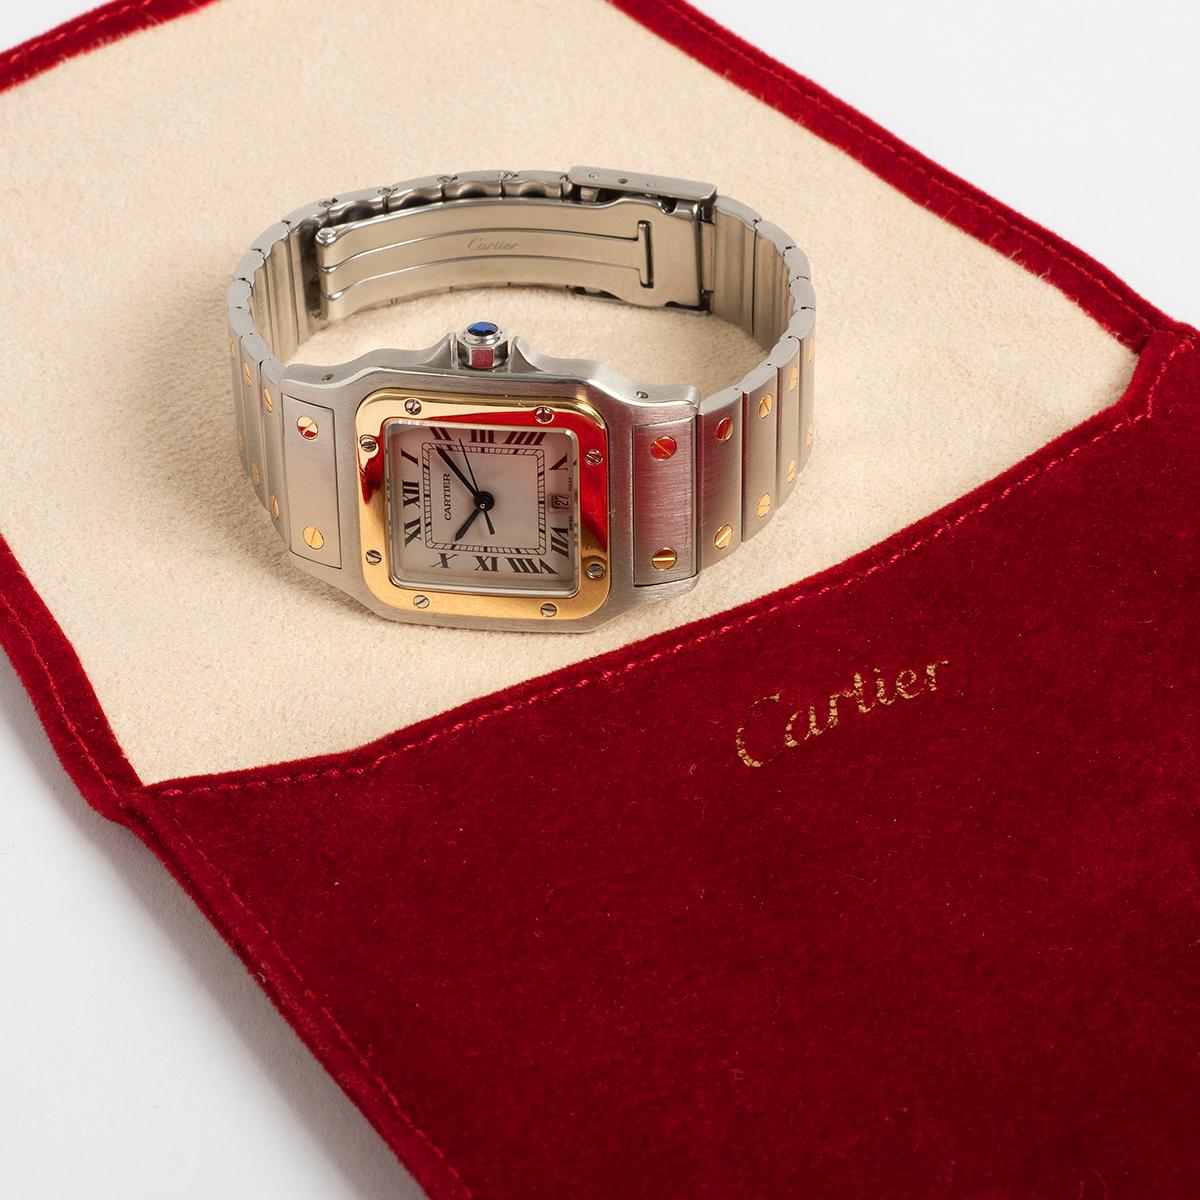 Our classic and elegant Cartier Santos Galbee quartz features a 29mm x 41mm 18k gold and stainless steel case with 18k yellow gold and stainless steel bracelet. Presented in outstanding condition with very light signs of use, this example was